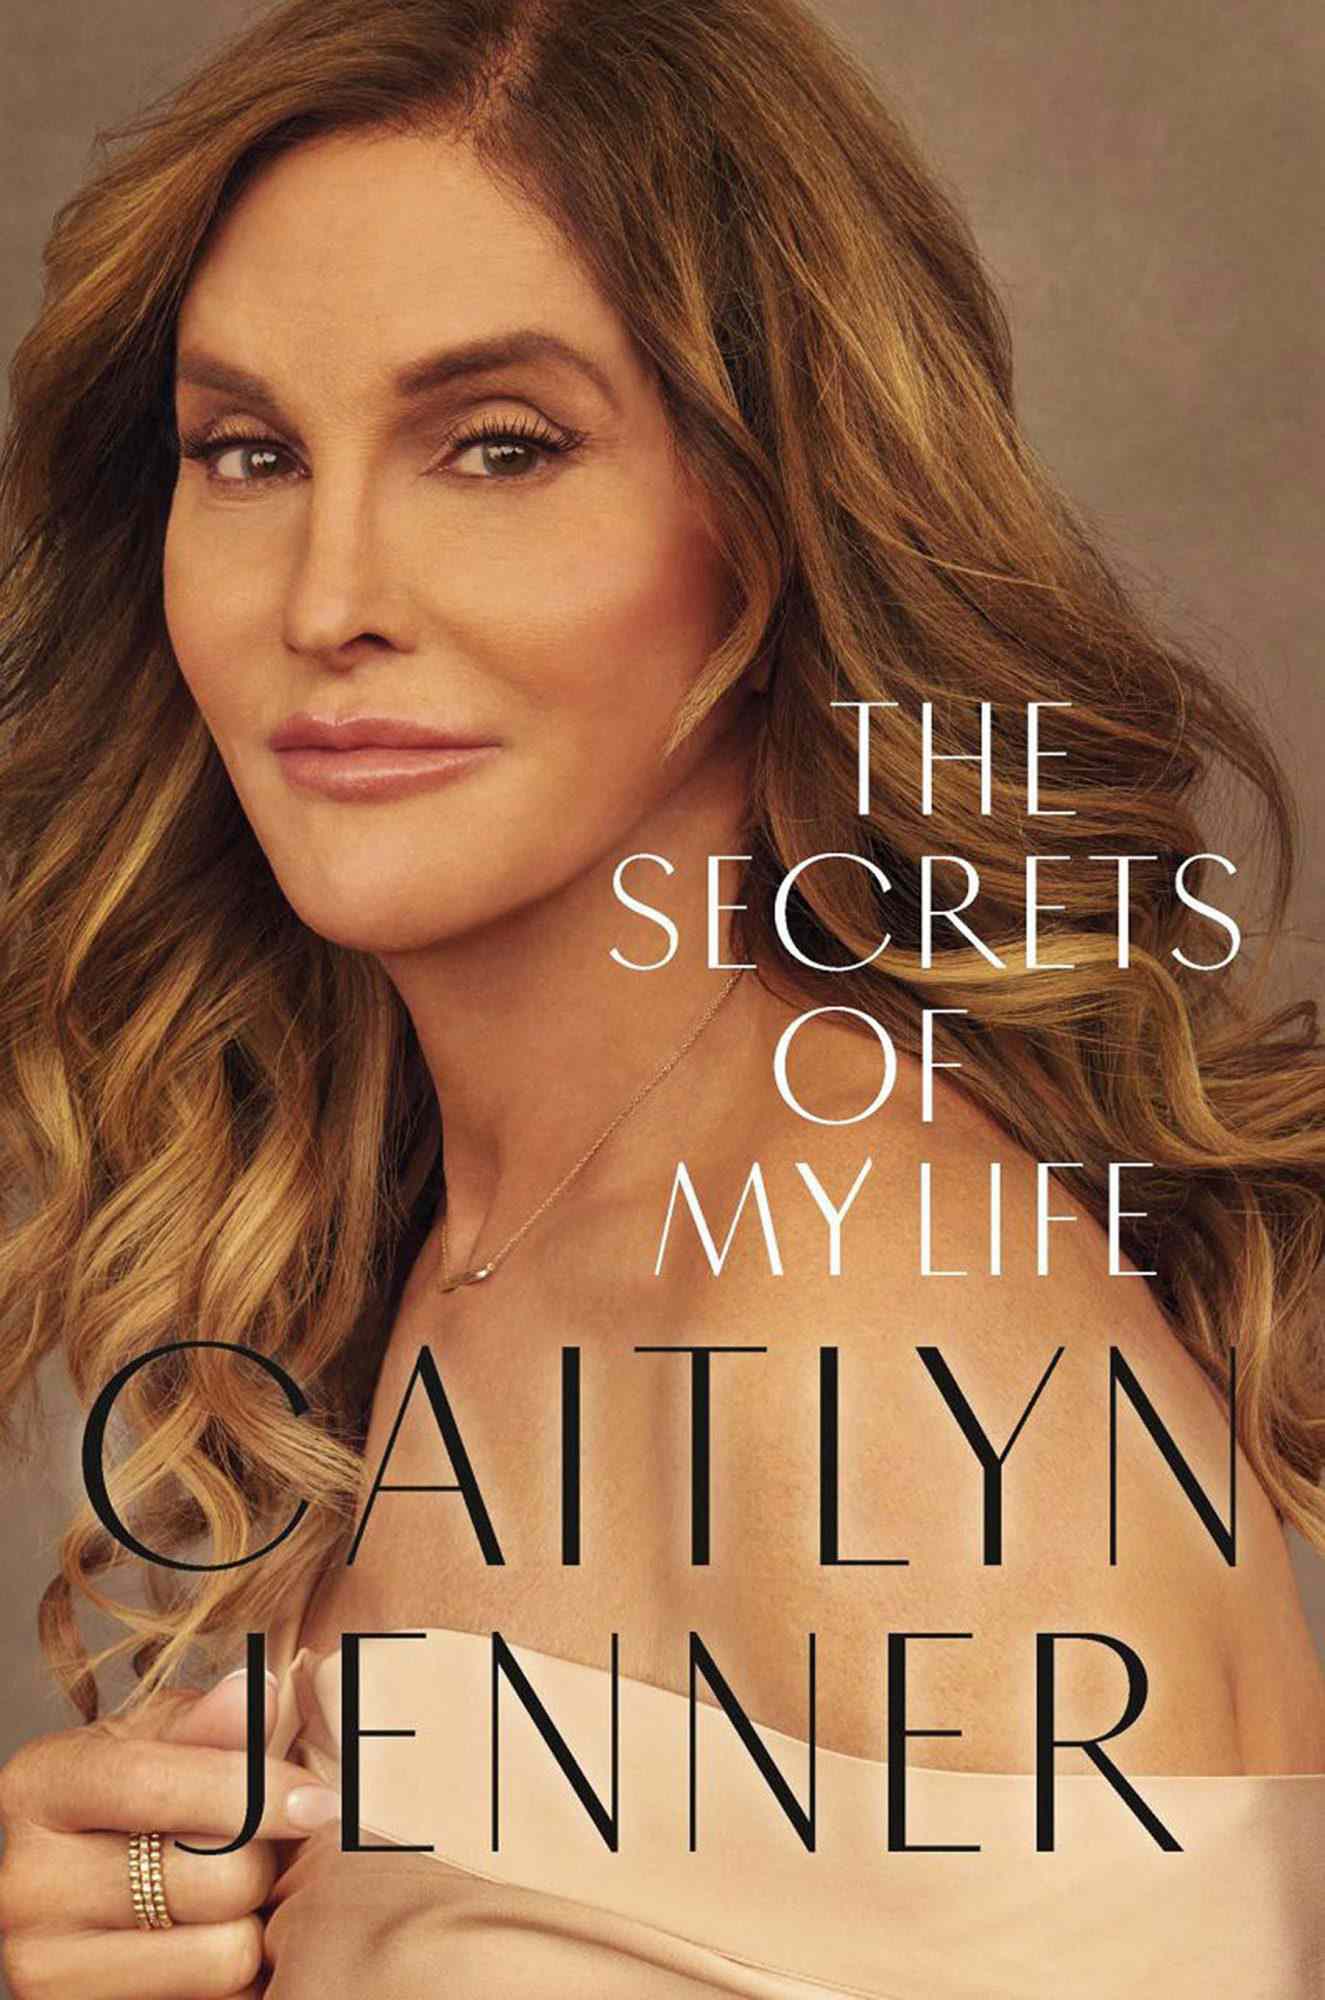 The Secrets of My Life by Caitlyn Jenner CR: Grand Central Publishing